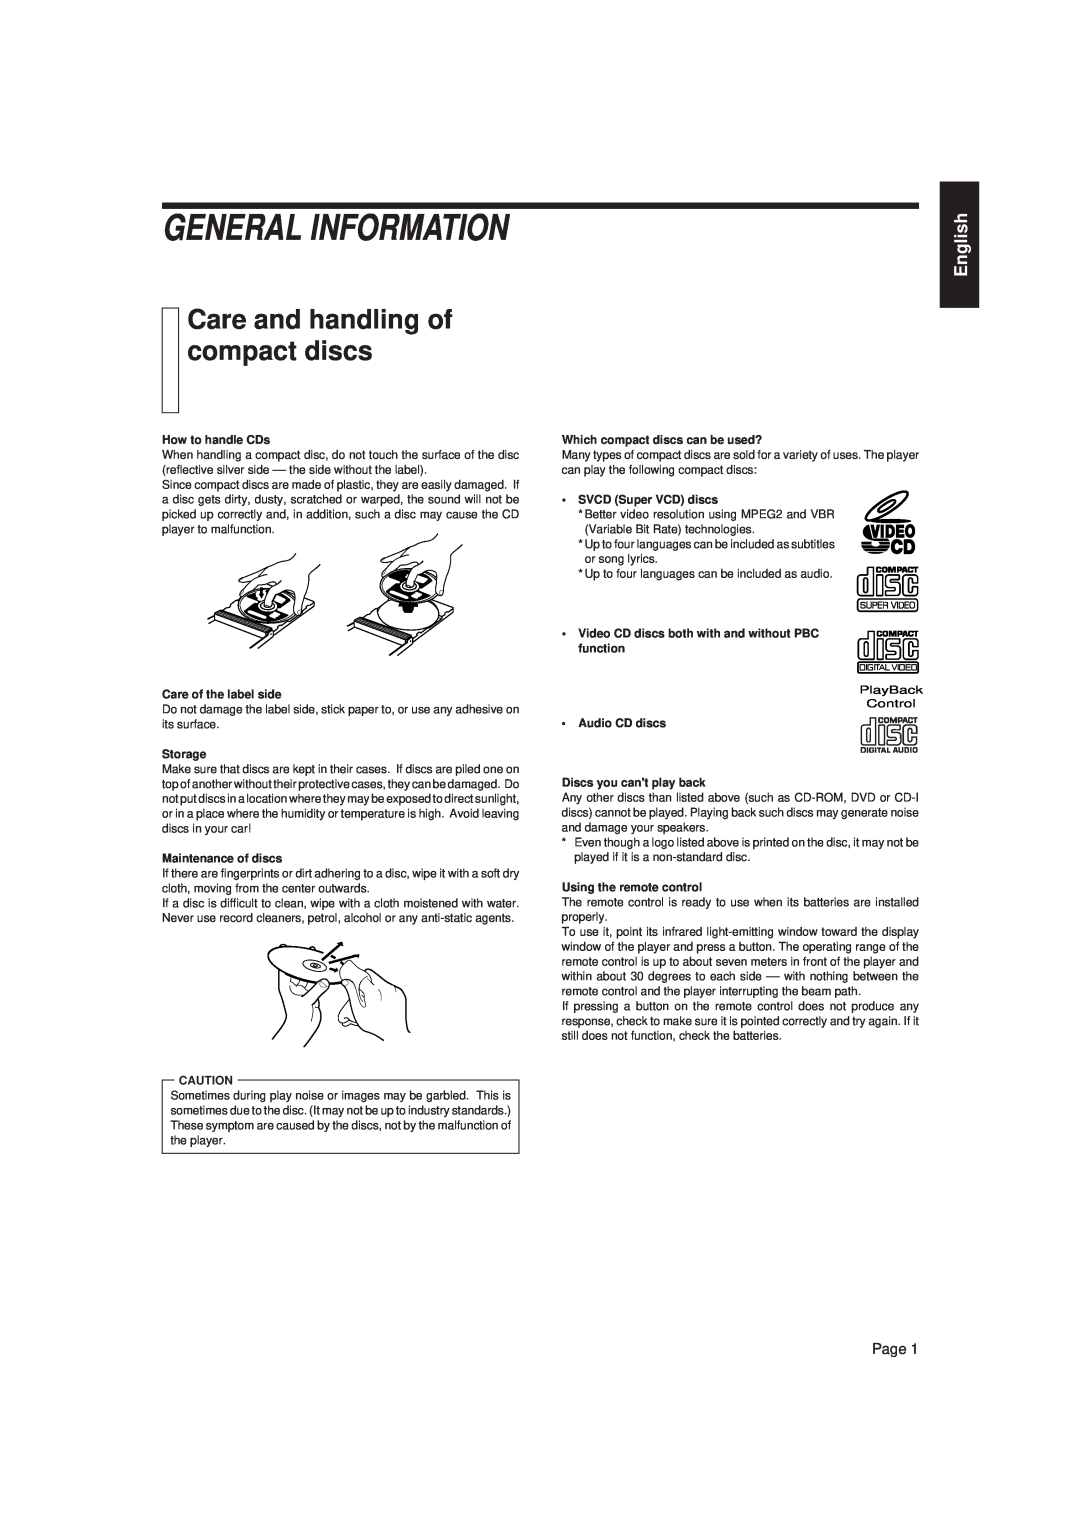 JVC XL-MV7000GD manual General Information, Care and handling of compact discs, English, Page 